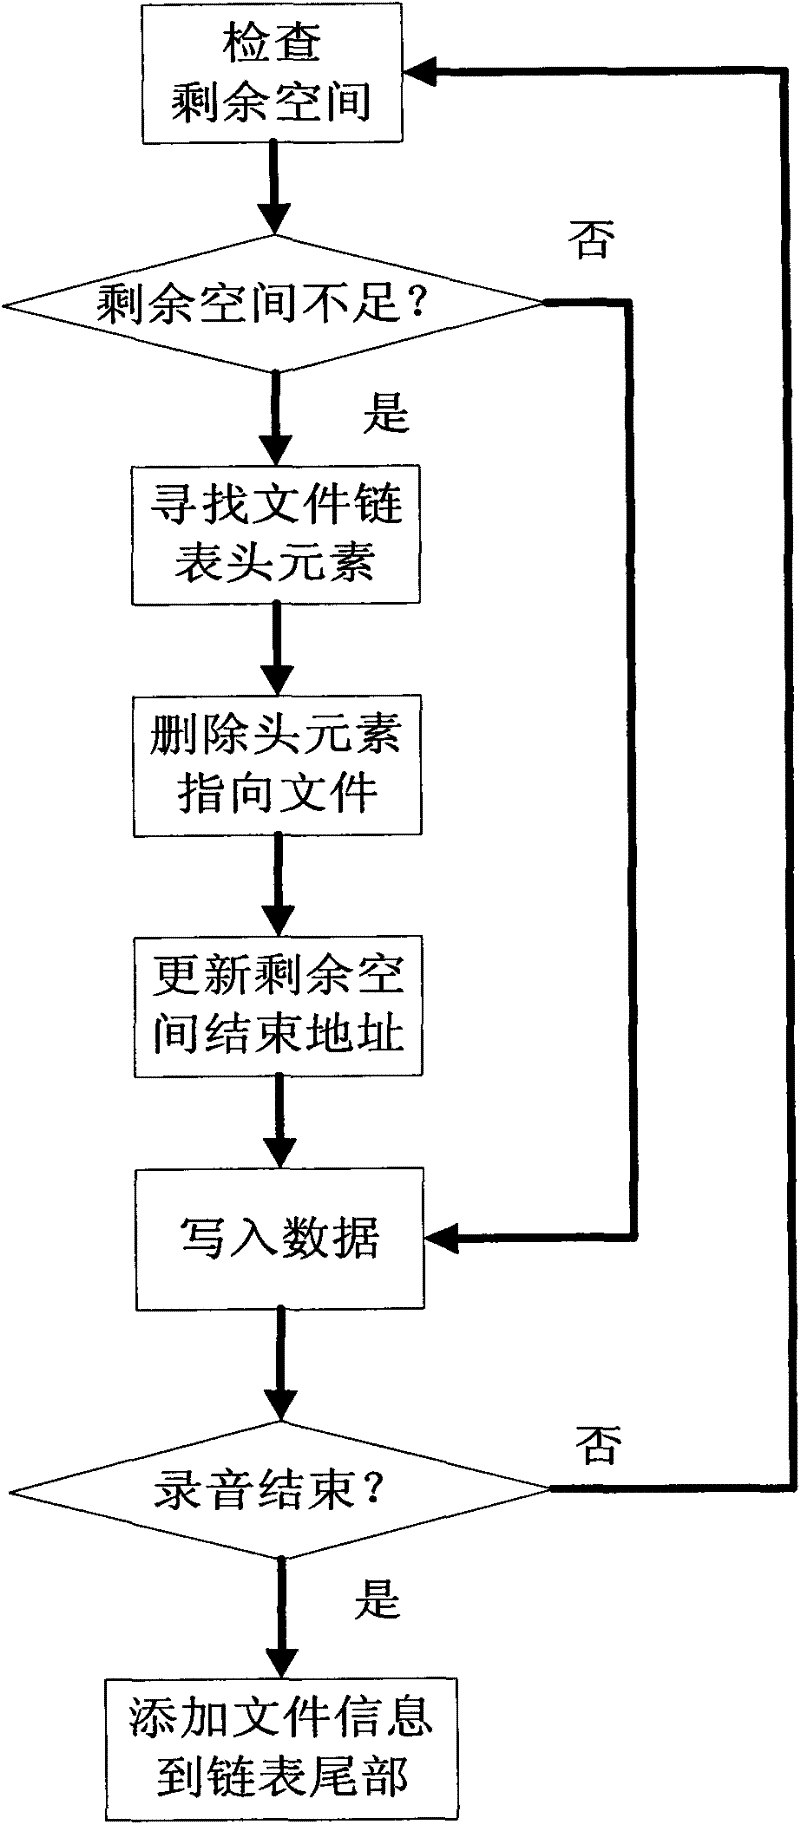 Sound and time recording system of embedded multi-channel phone